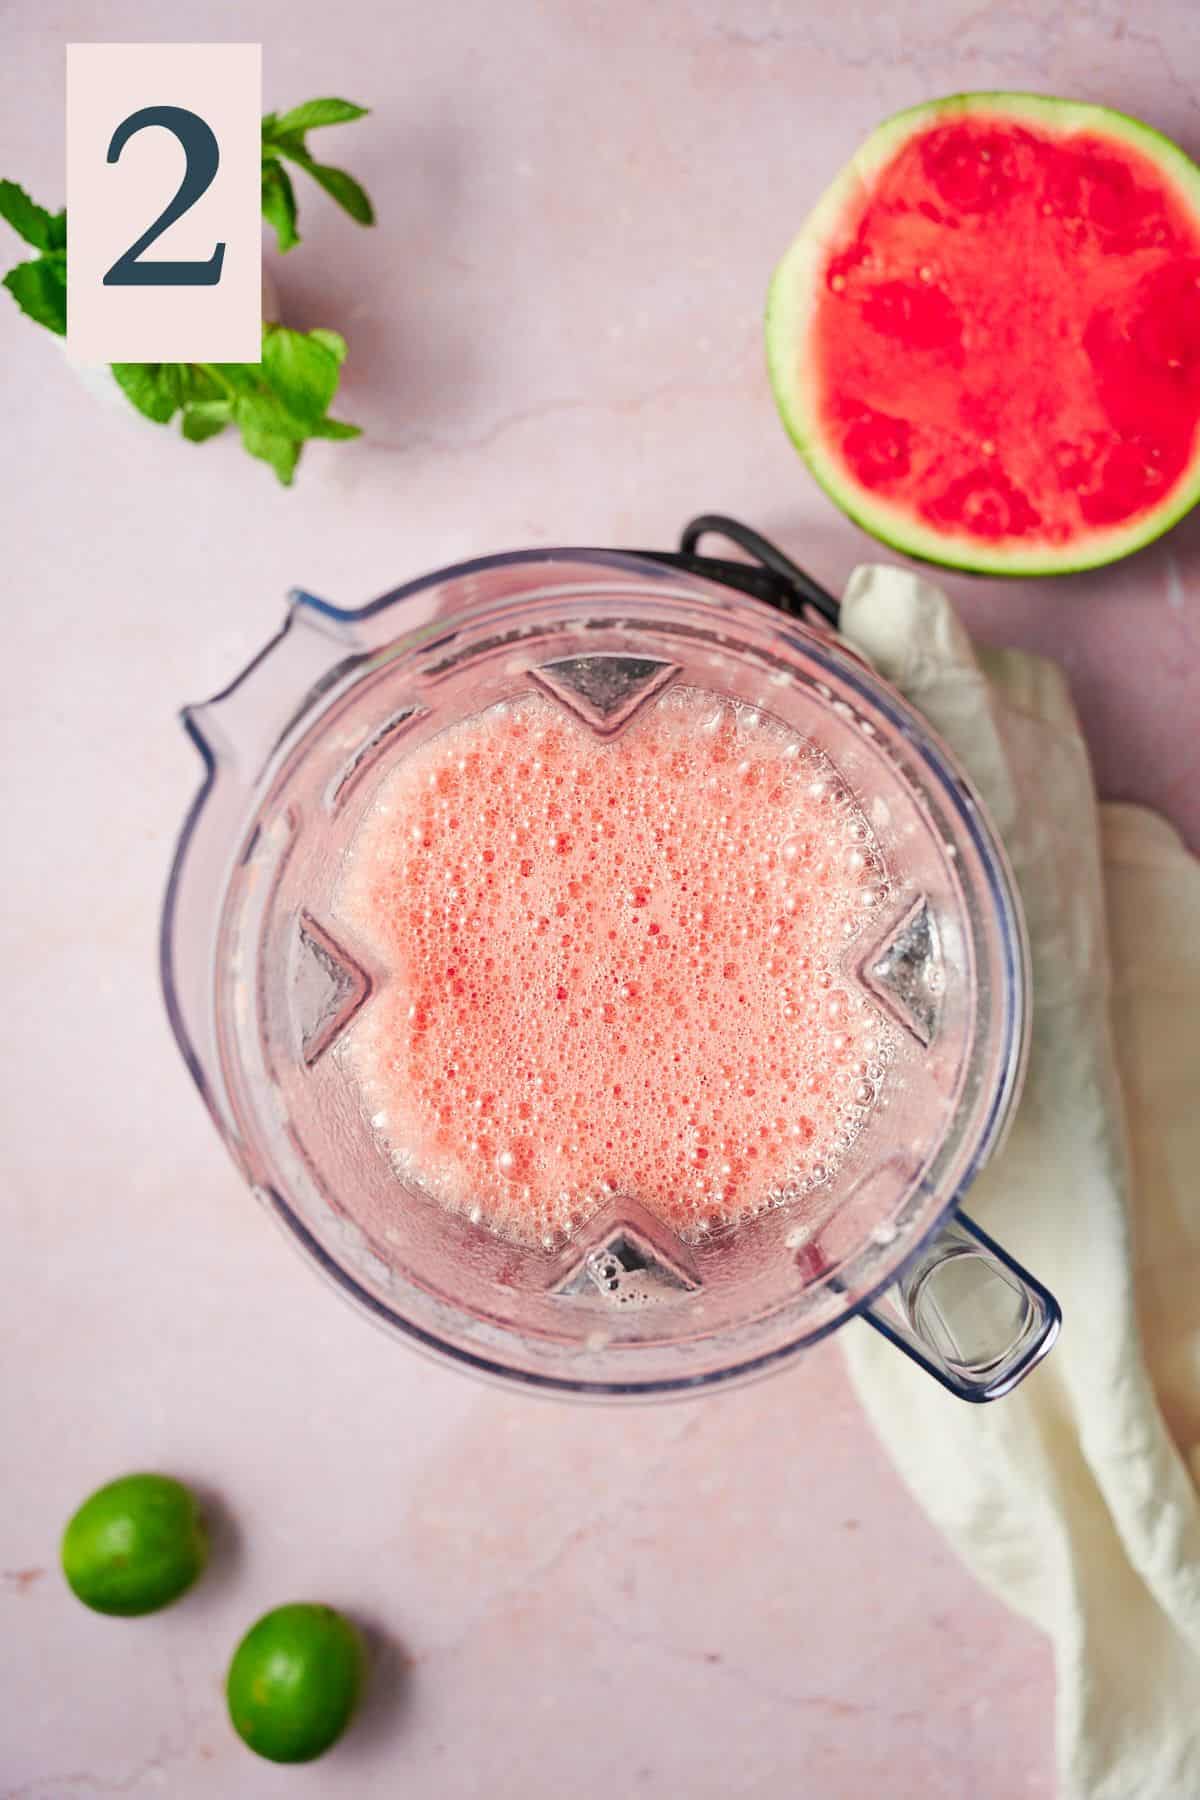 blended watermelon juice with a foamy top in a blender, with a half of a watermelon beneath it. 